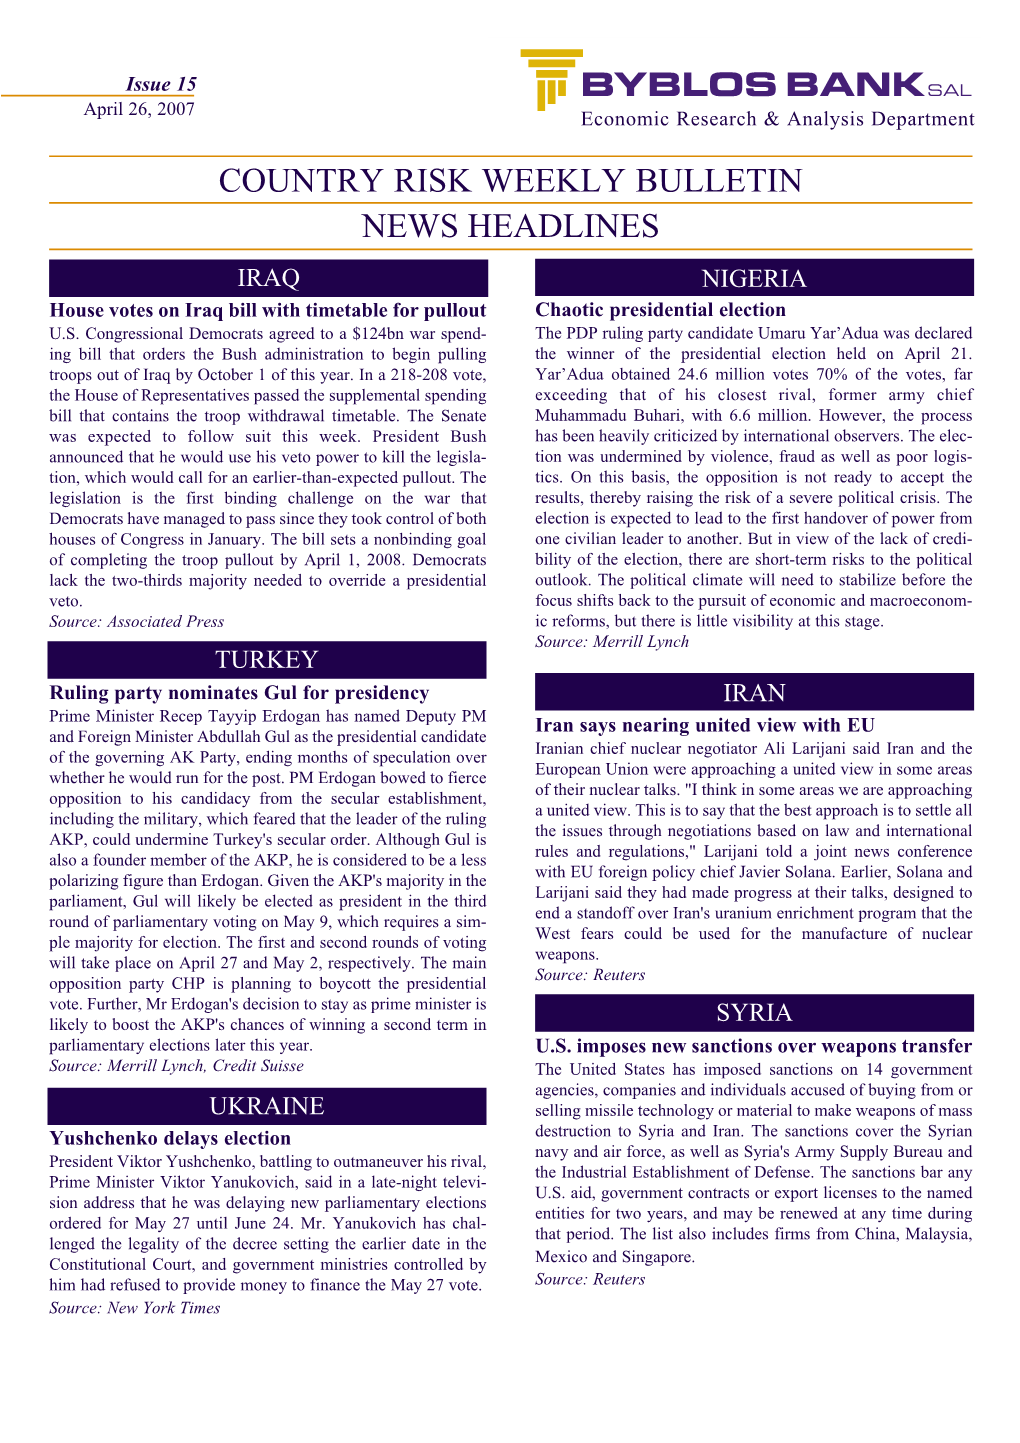 COUNTRY RISK WEEKLY BULLETIN NEWS HEADLINES IRAQS NIGERIA House Votes on Iraq Bill with Timetable for Pullout Chaotic Presidential Election U.S